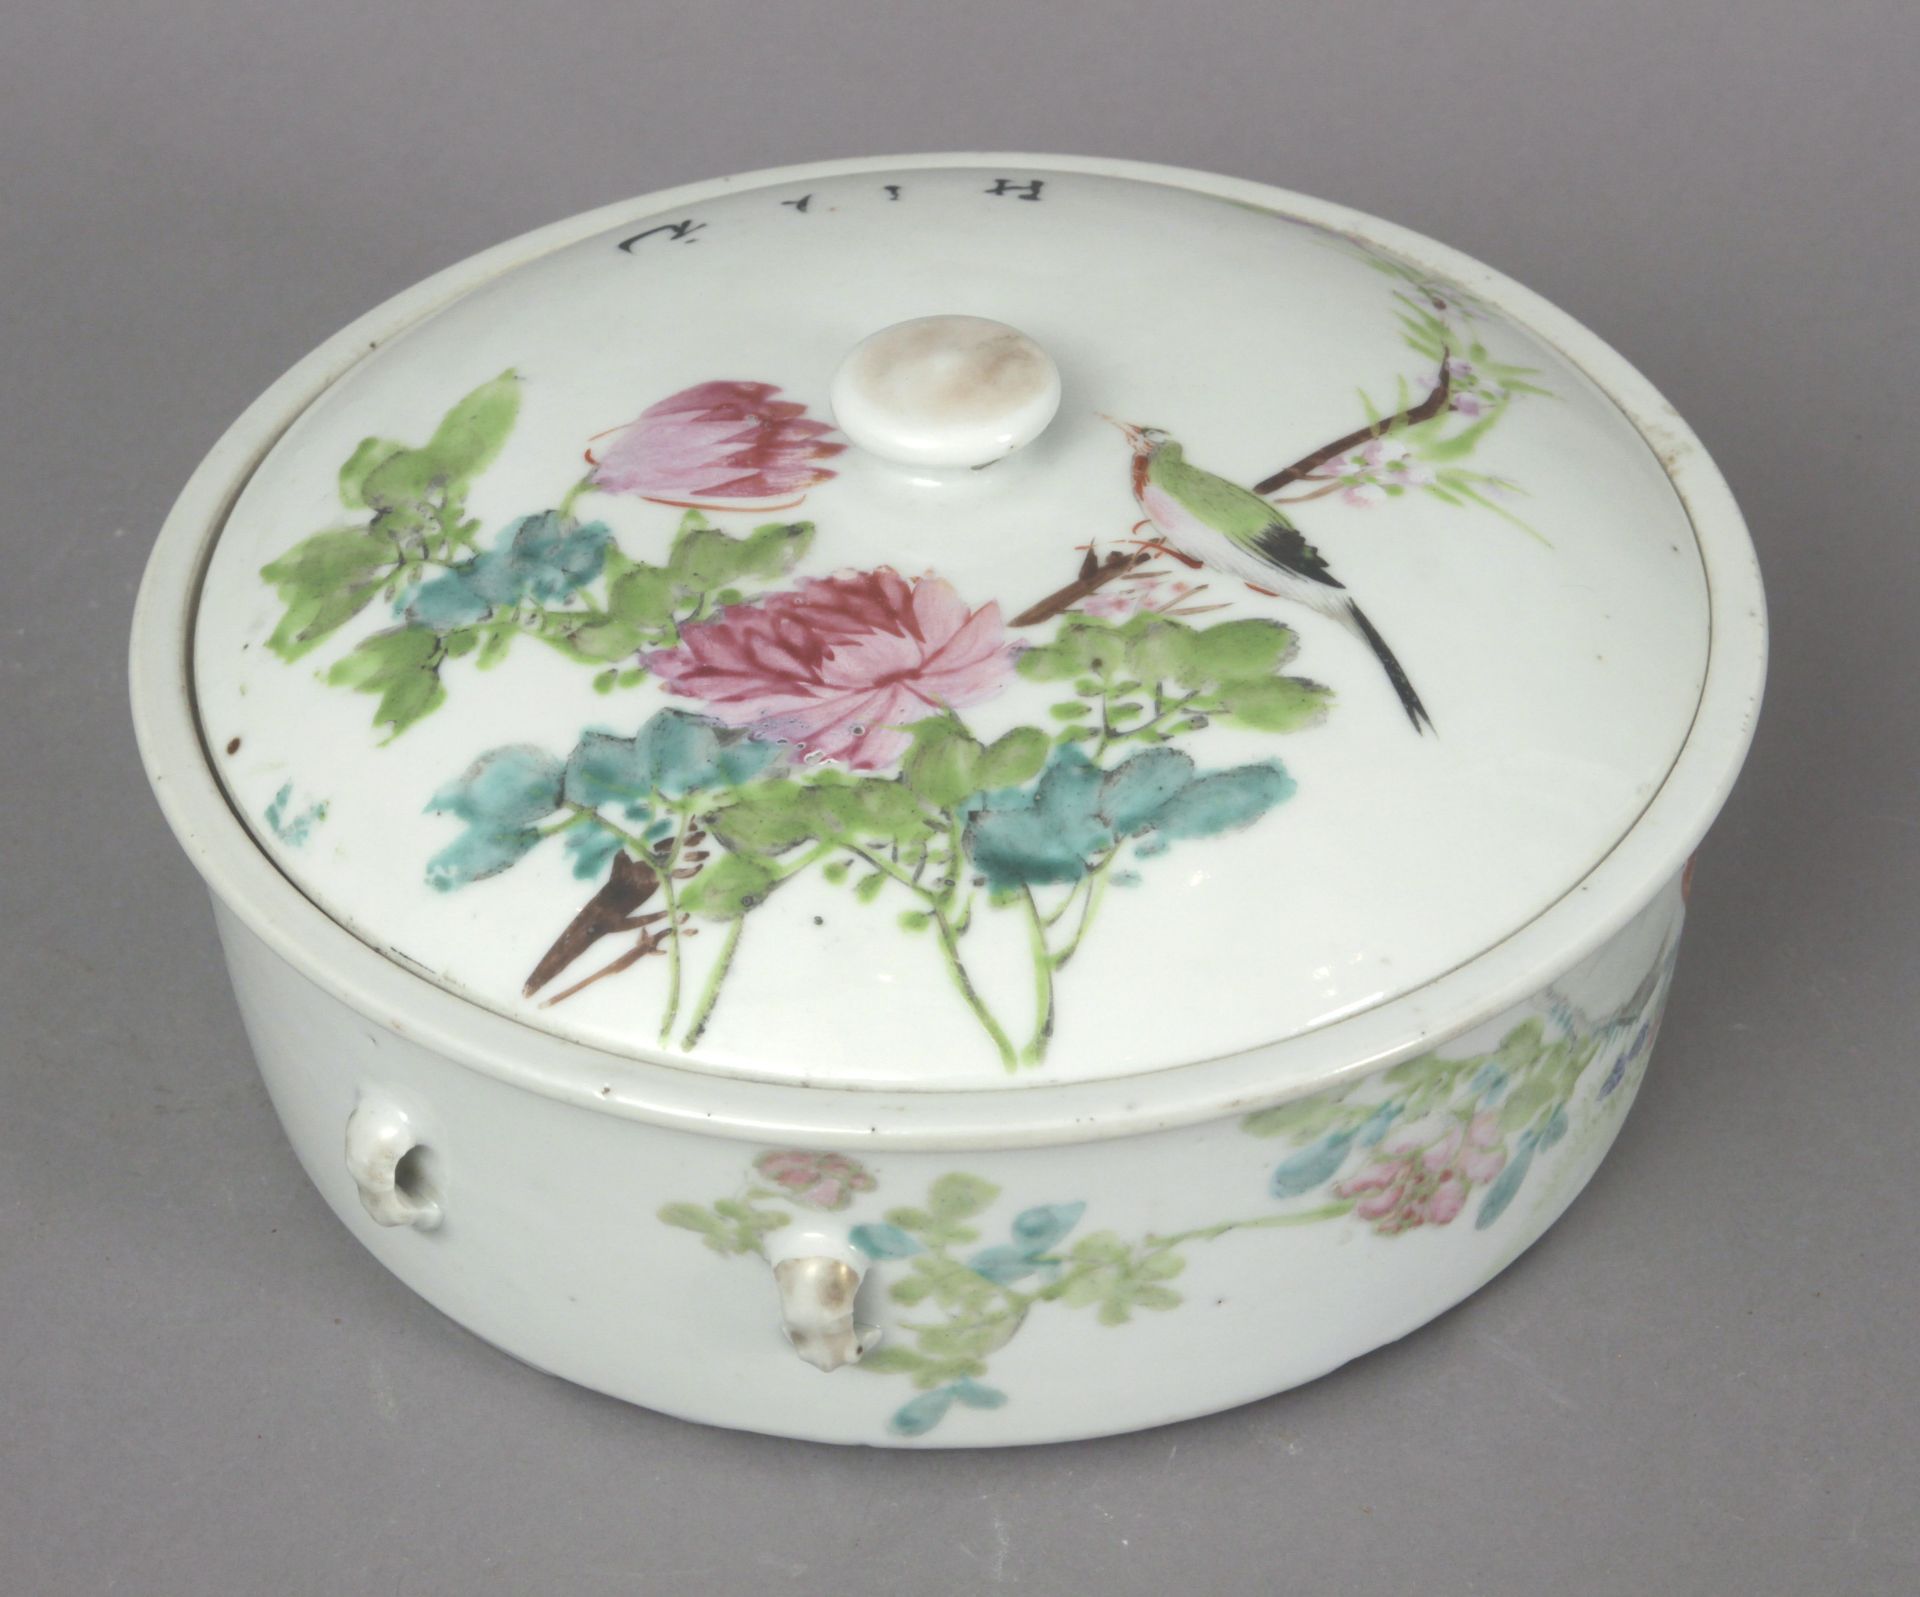 A 20th century Chinese legume container in Famille Rose porcelain - Image 2 of 4